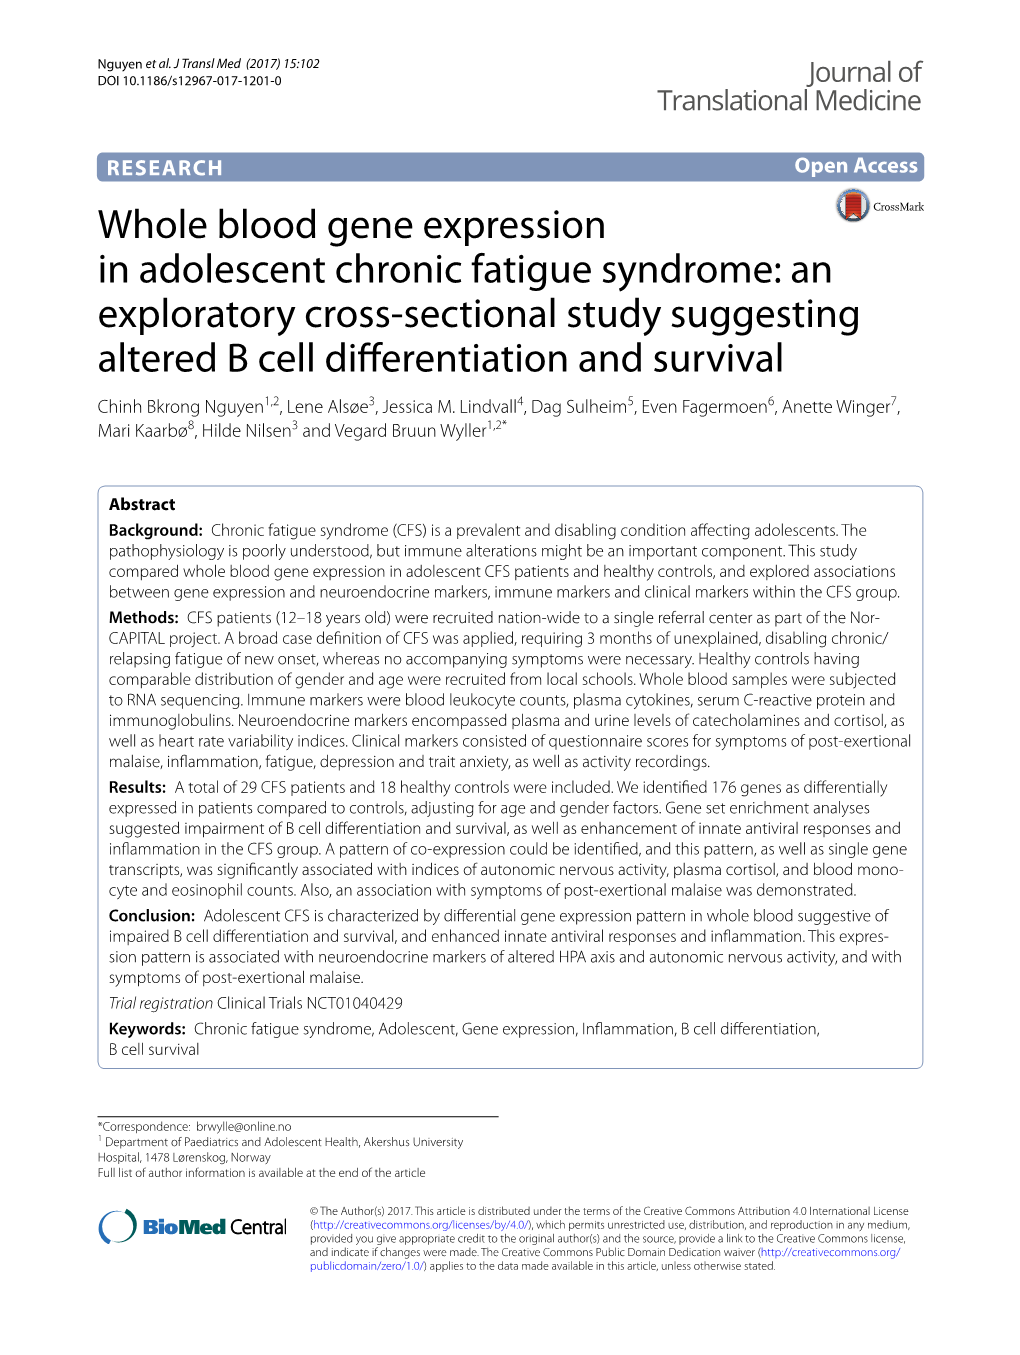 Whole Blood Gene Expression in Adolescent Chronic Fatigue Syndrome